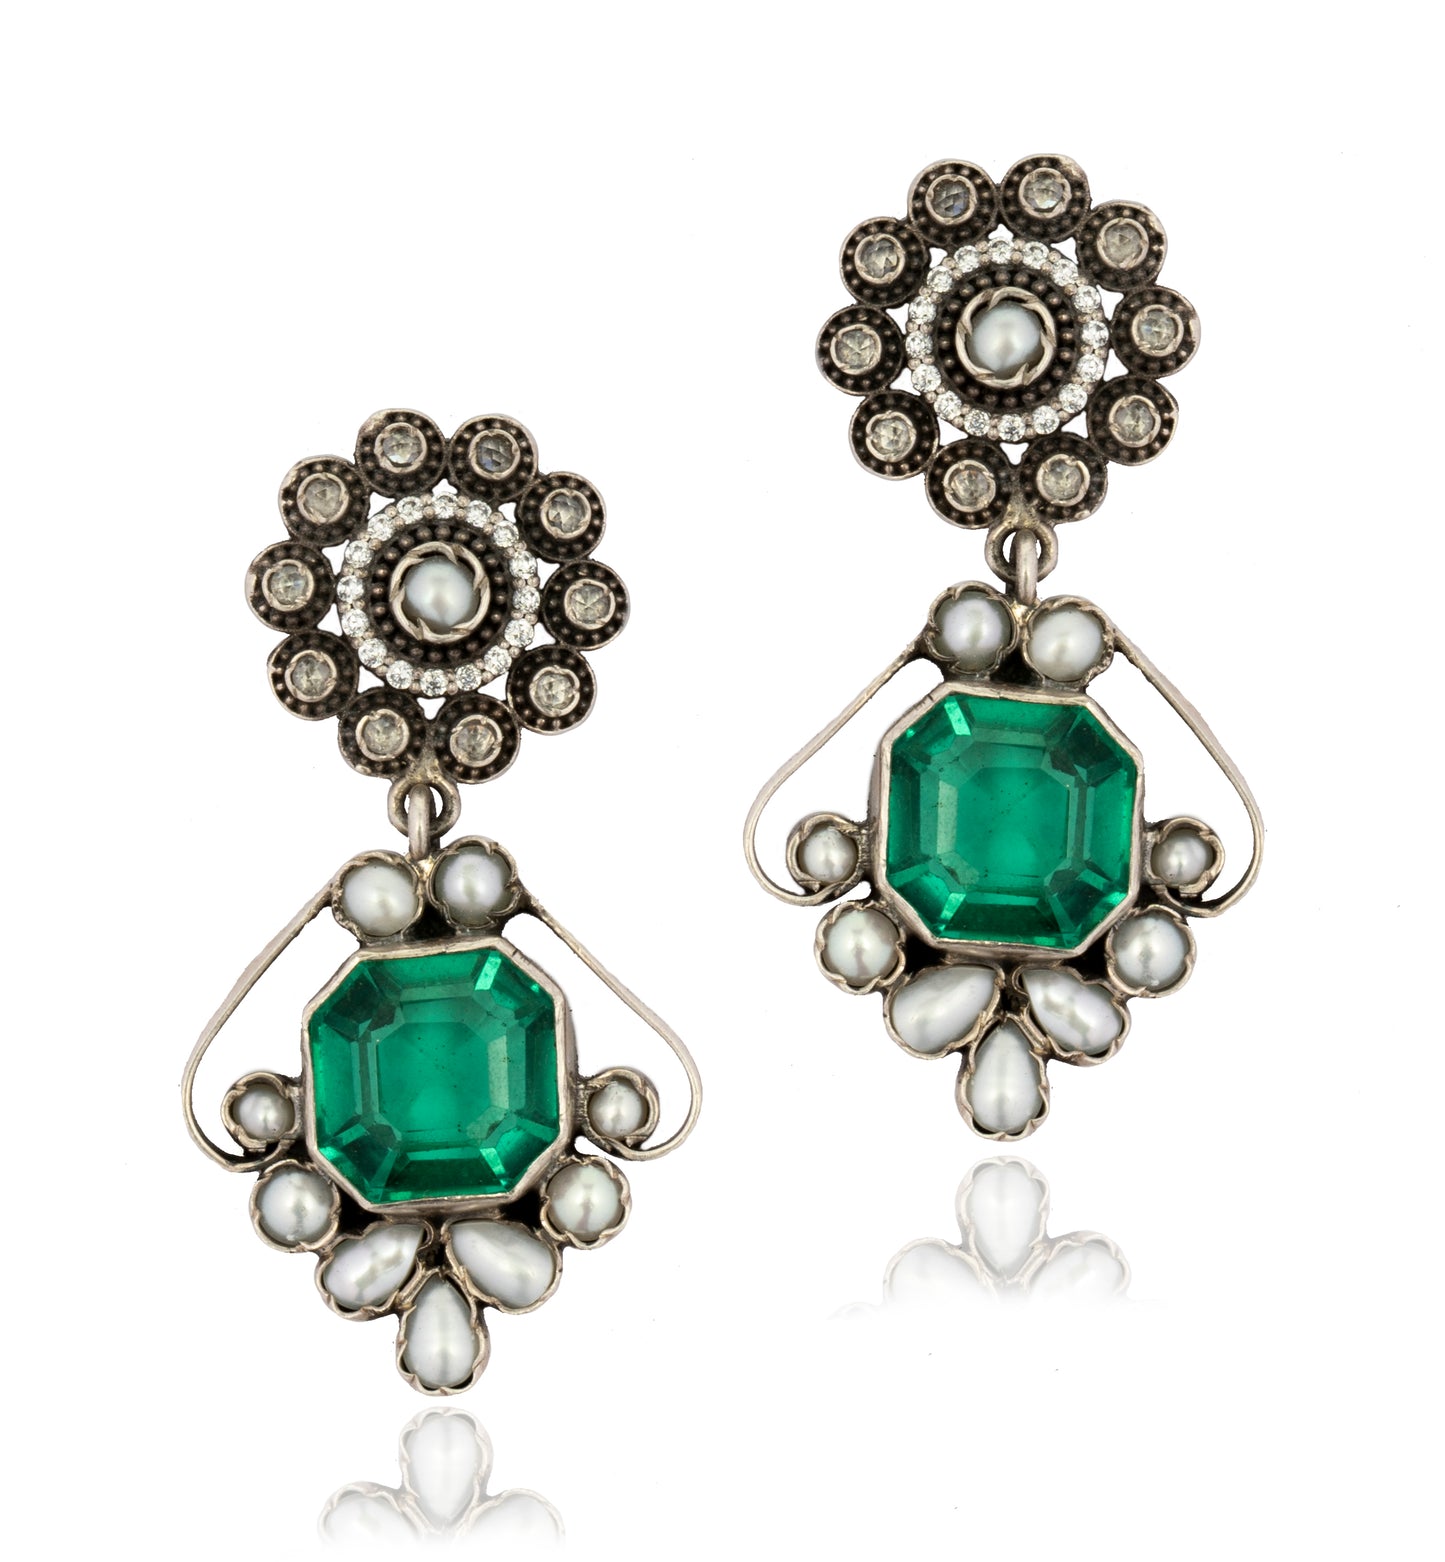 925 Sterling Silver Earrings with Green Gemstone and Pearls